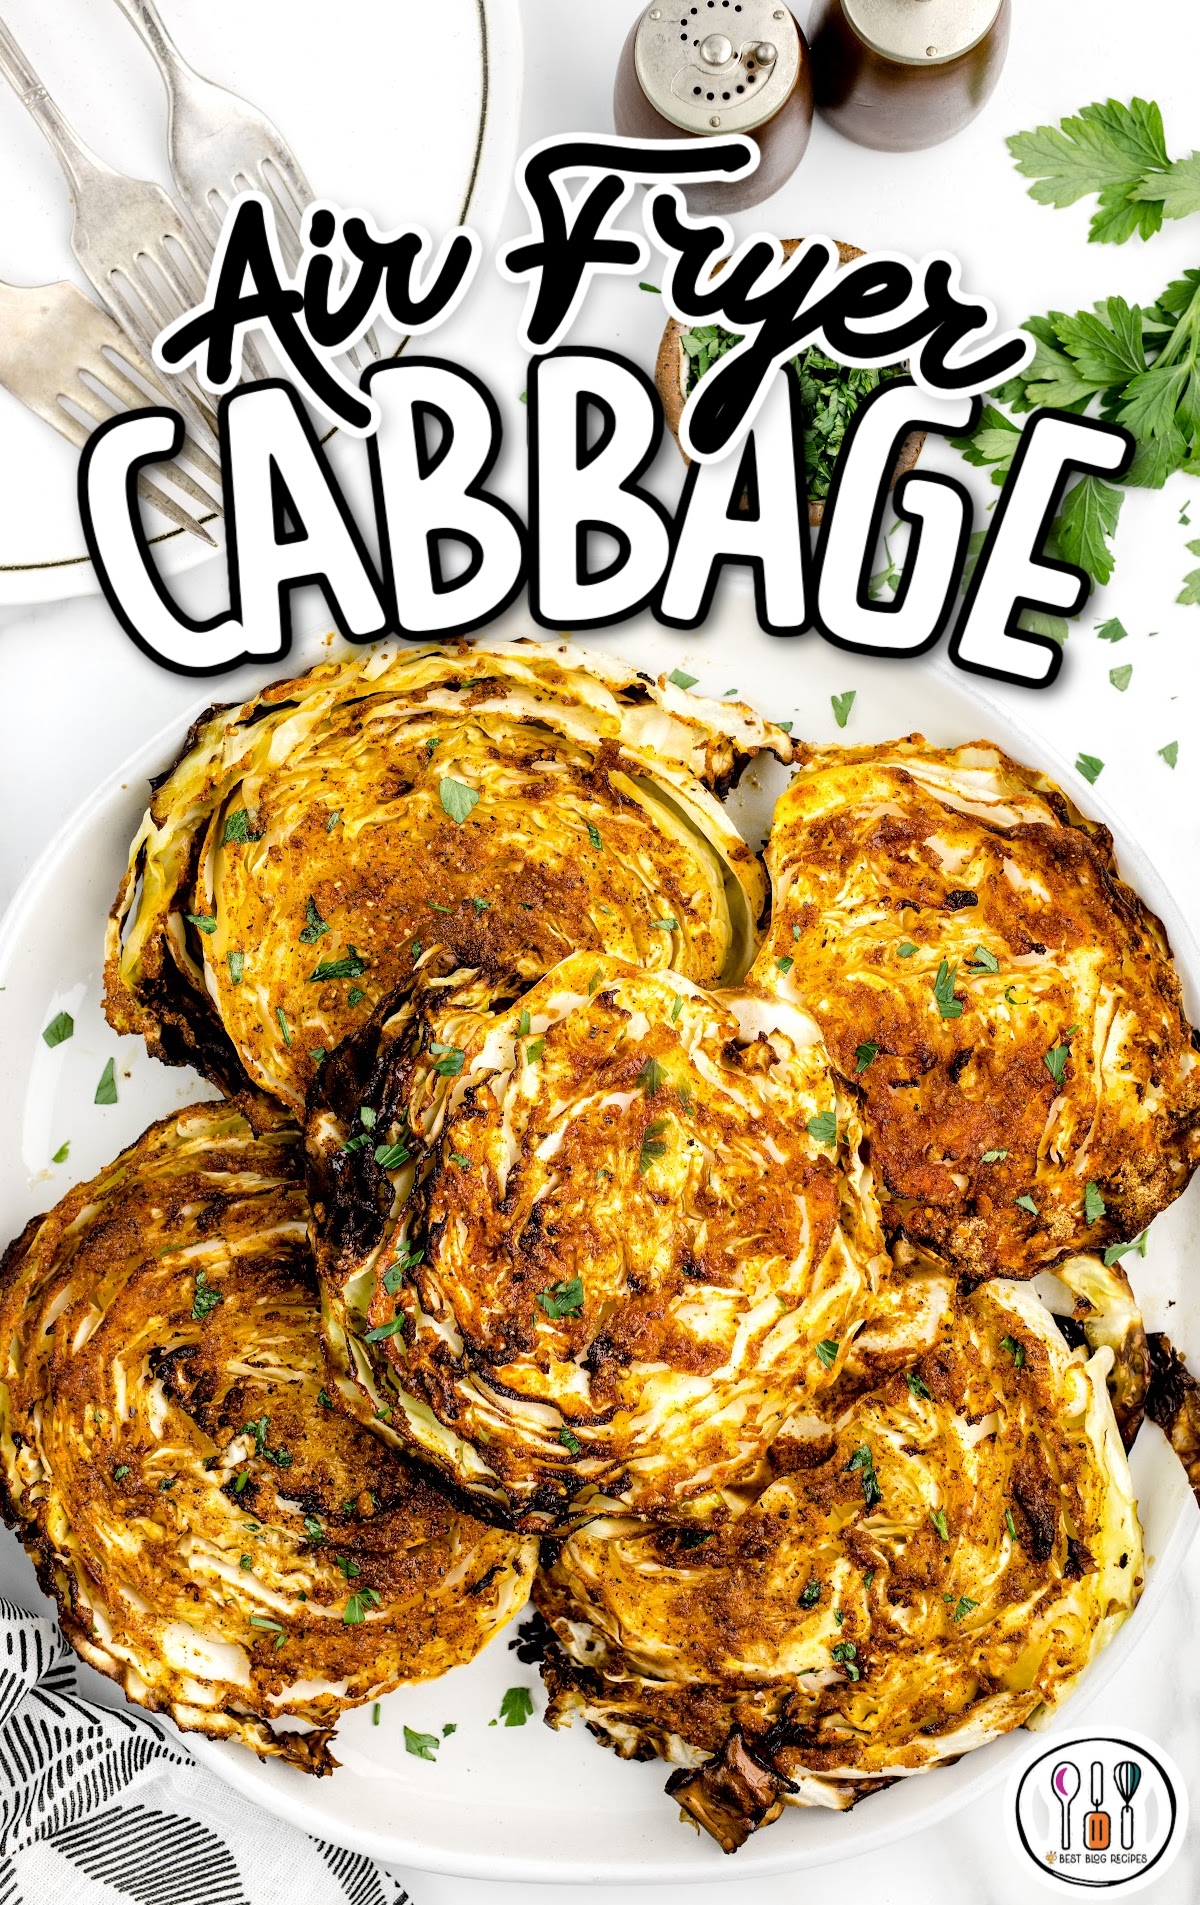 a plate of fried Cabbage garnished with parsley